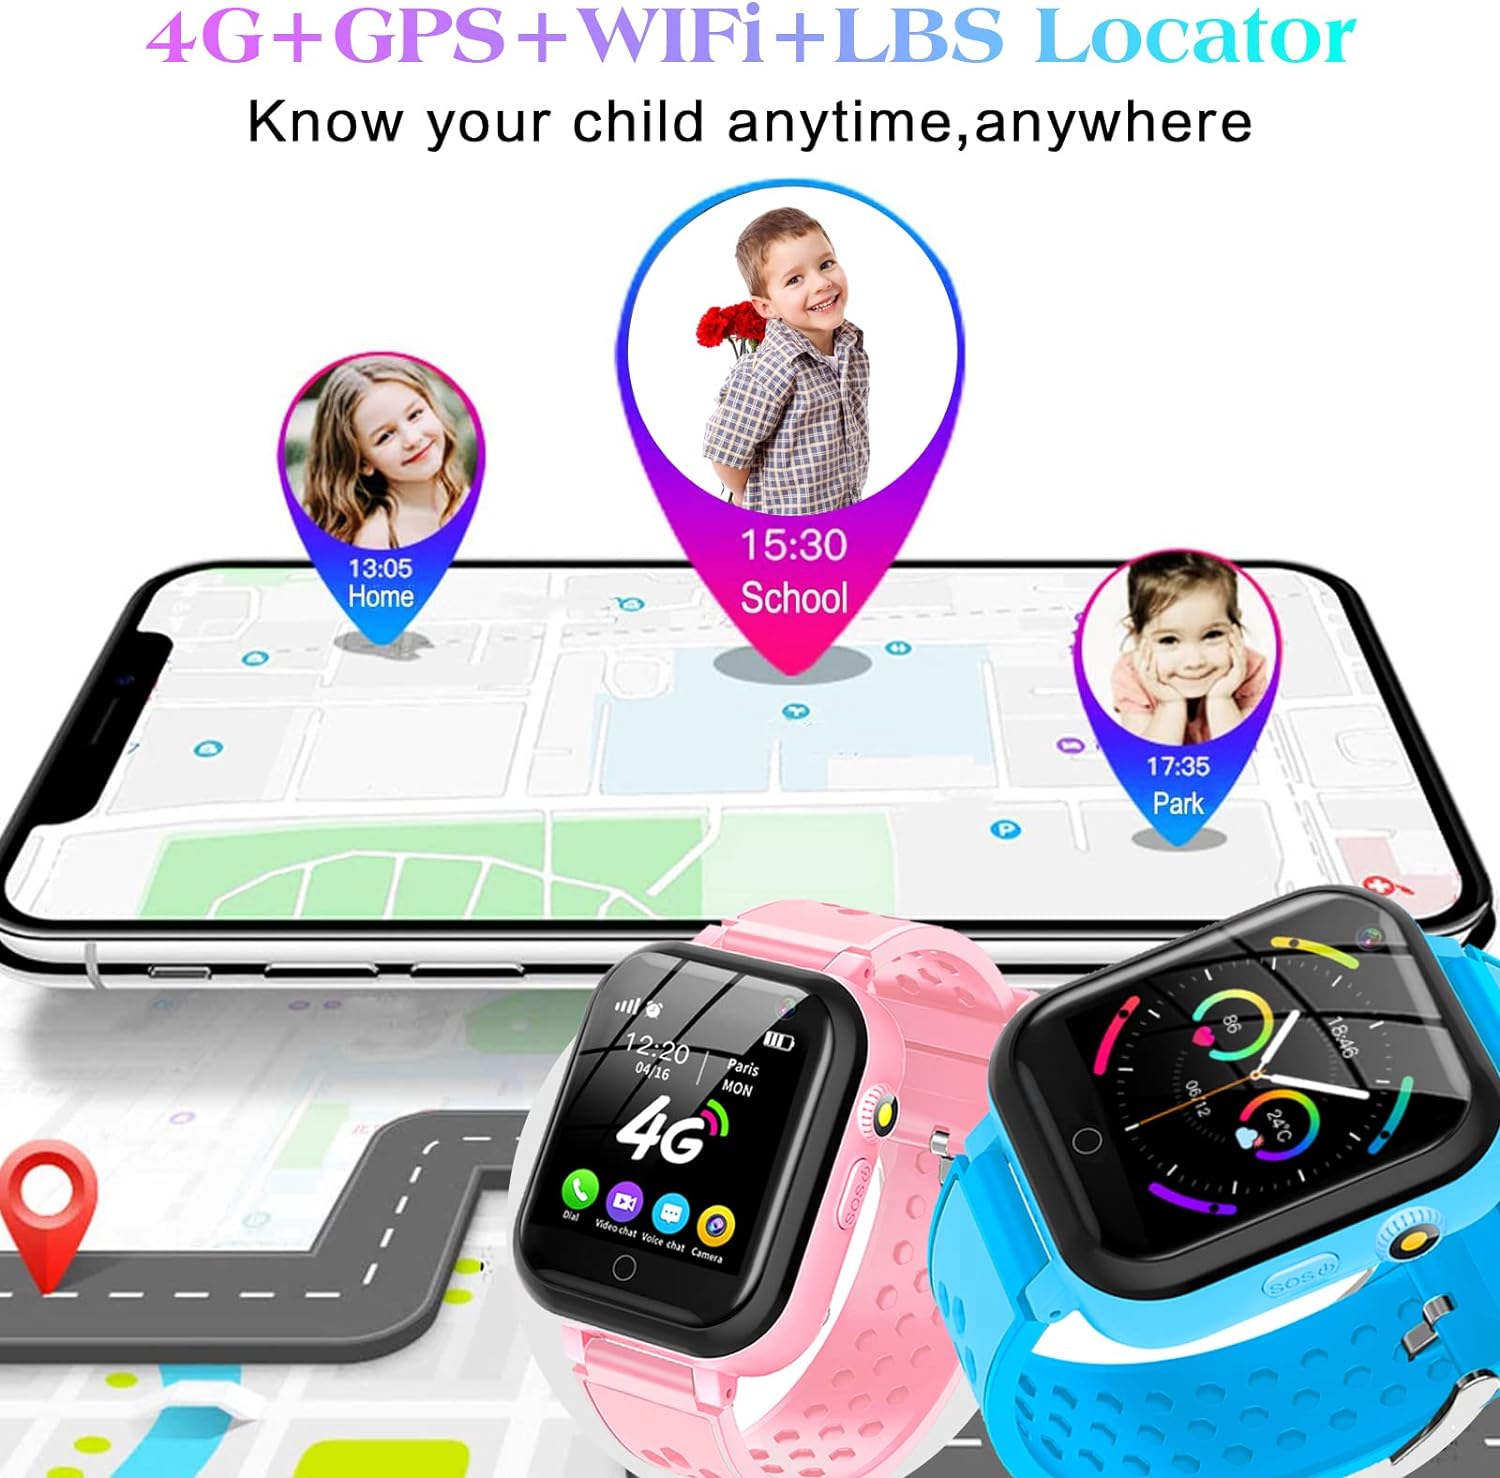 DDIOYIUR Smart Watch for Kids, 4G Kids Phone Smartwatch with GPS Tracker, WiFi, SMS, Call,Voice Video Chat,Bluetooth,Audio Recording,Alarm,Pedometer, Wrist Watch for 4-16 Boys Girls Birthday Gifts